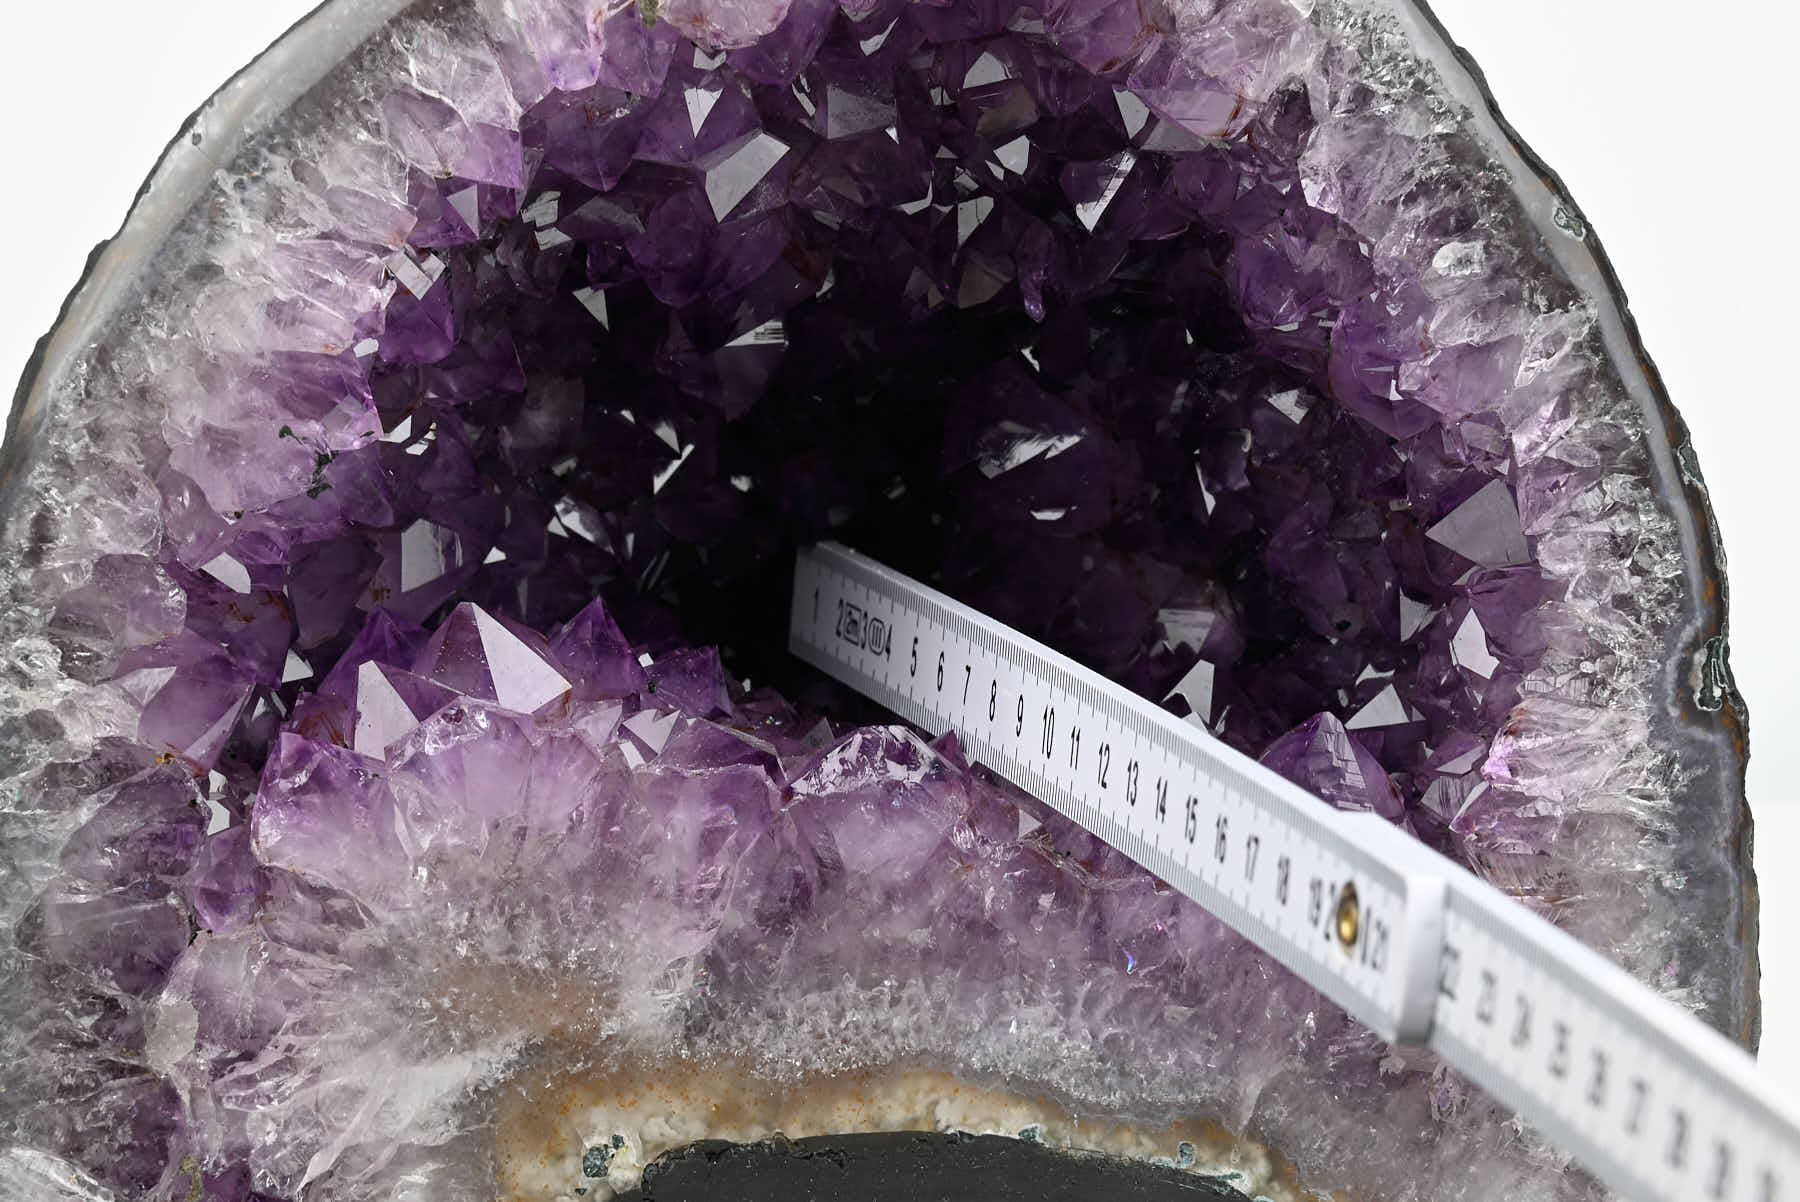 Extra Quality Amethyst Cathedral - 6.26kg, 18cm tall - #CAAMET-10012